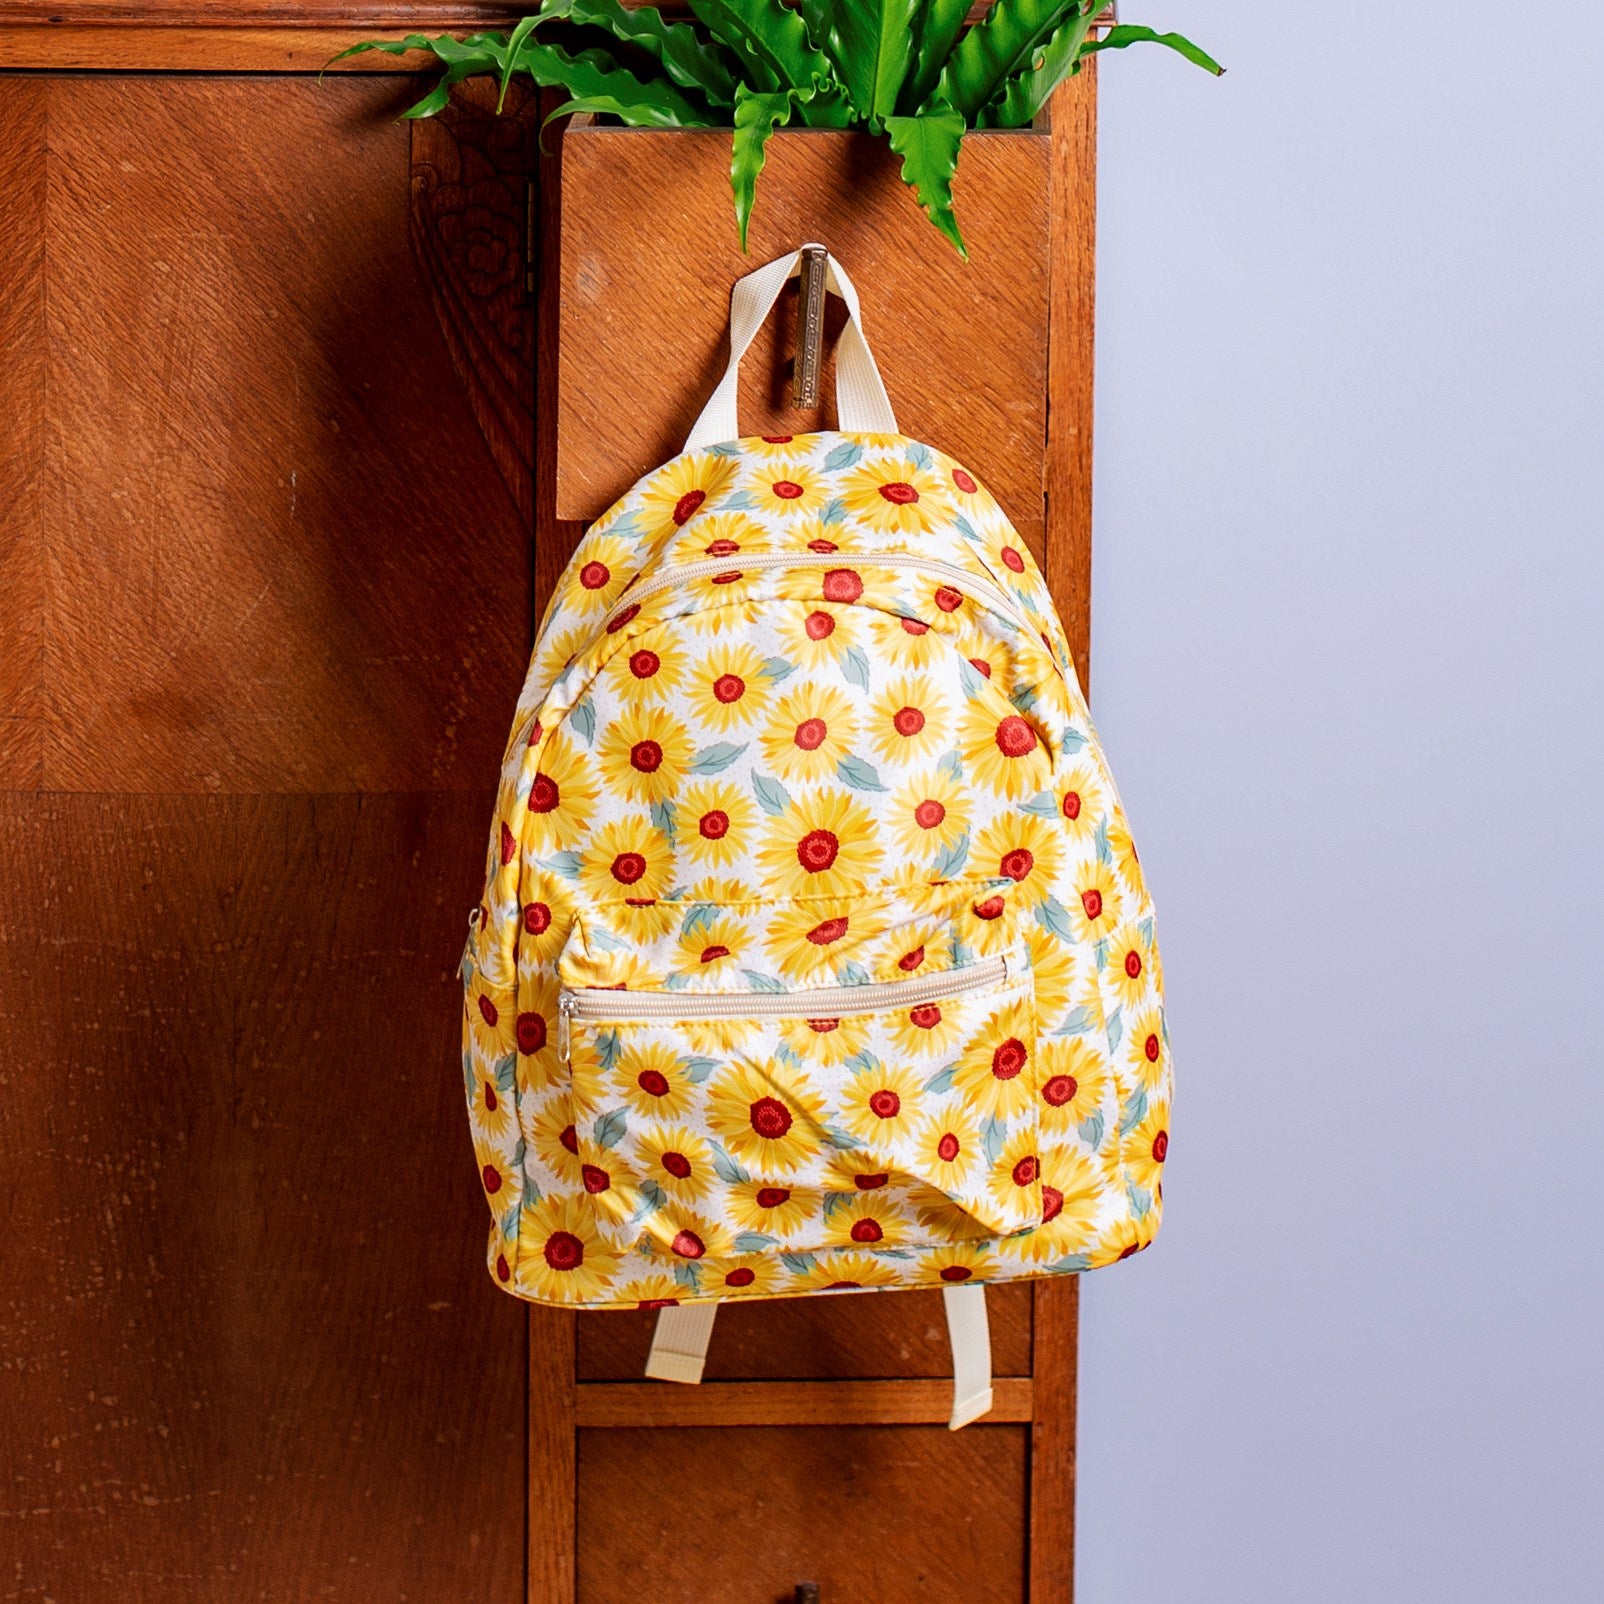 Sunflower Backpack Living from Home and Bay